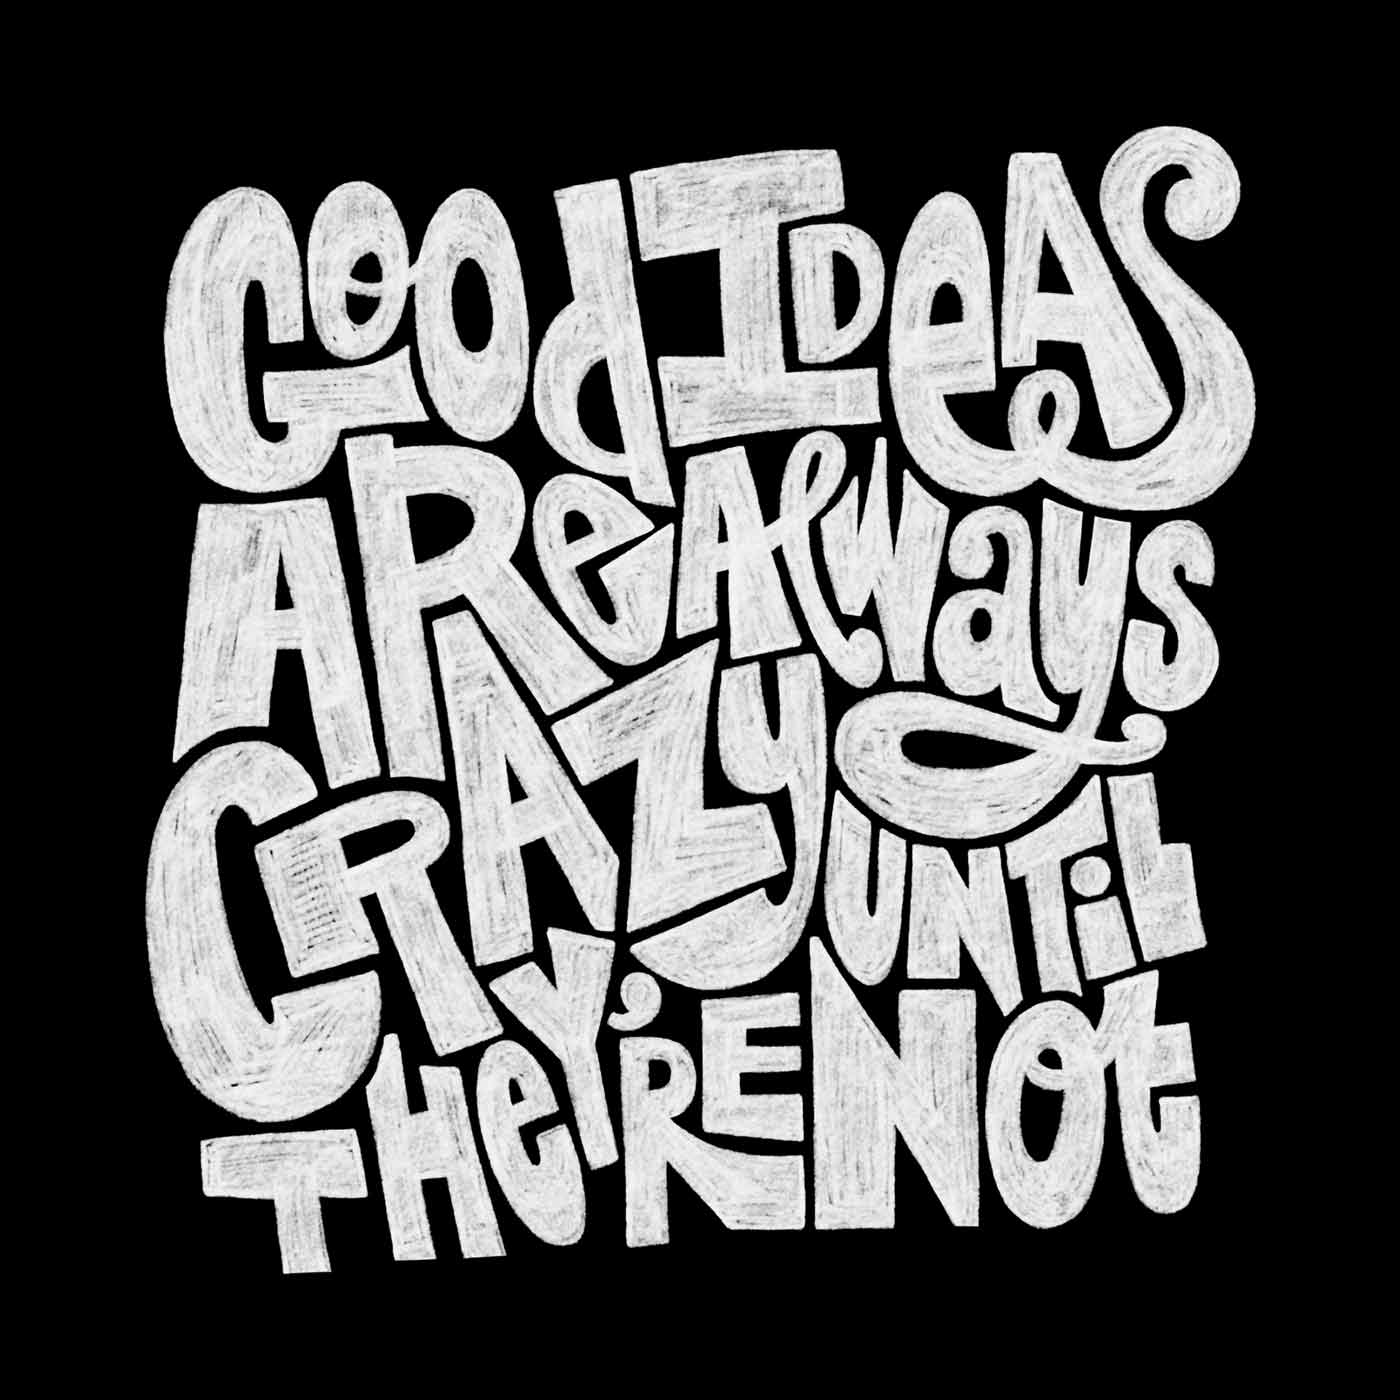 Hand drawn typography that says Good ideas are always crazy until they're not